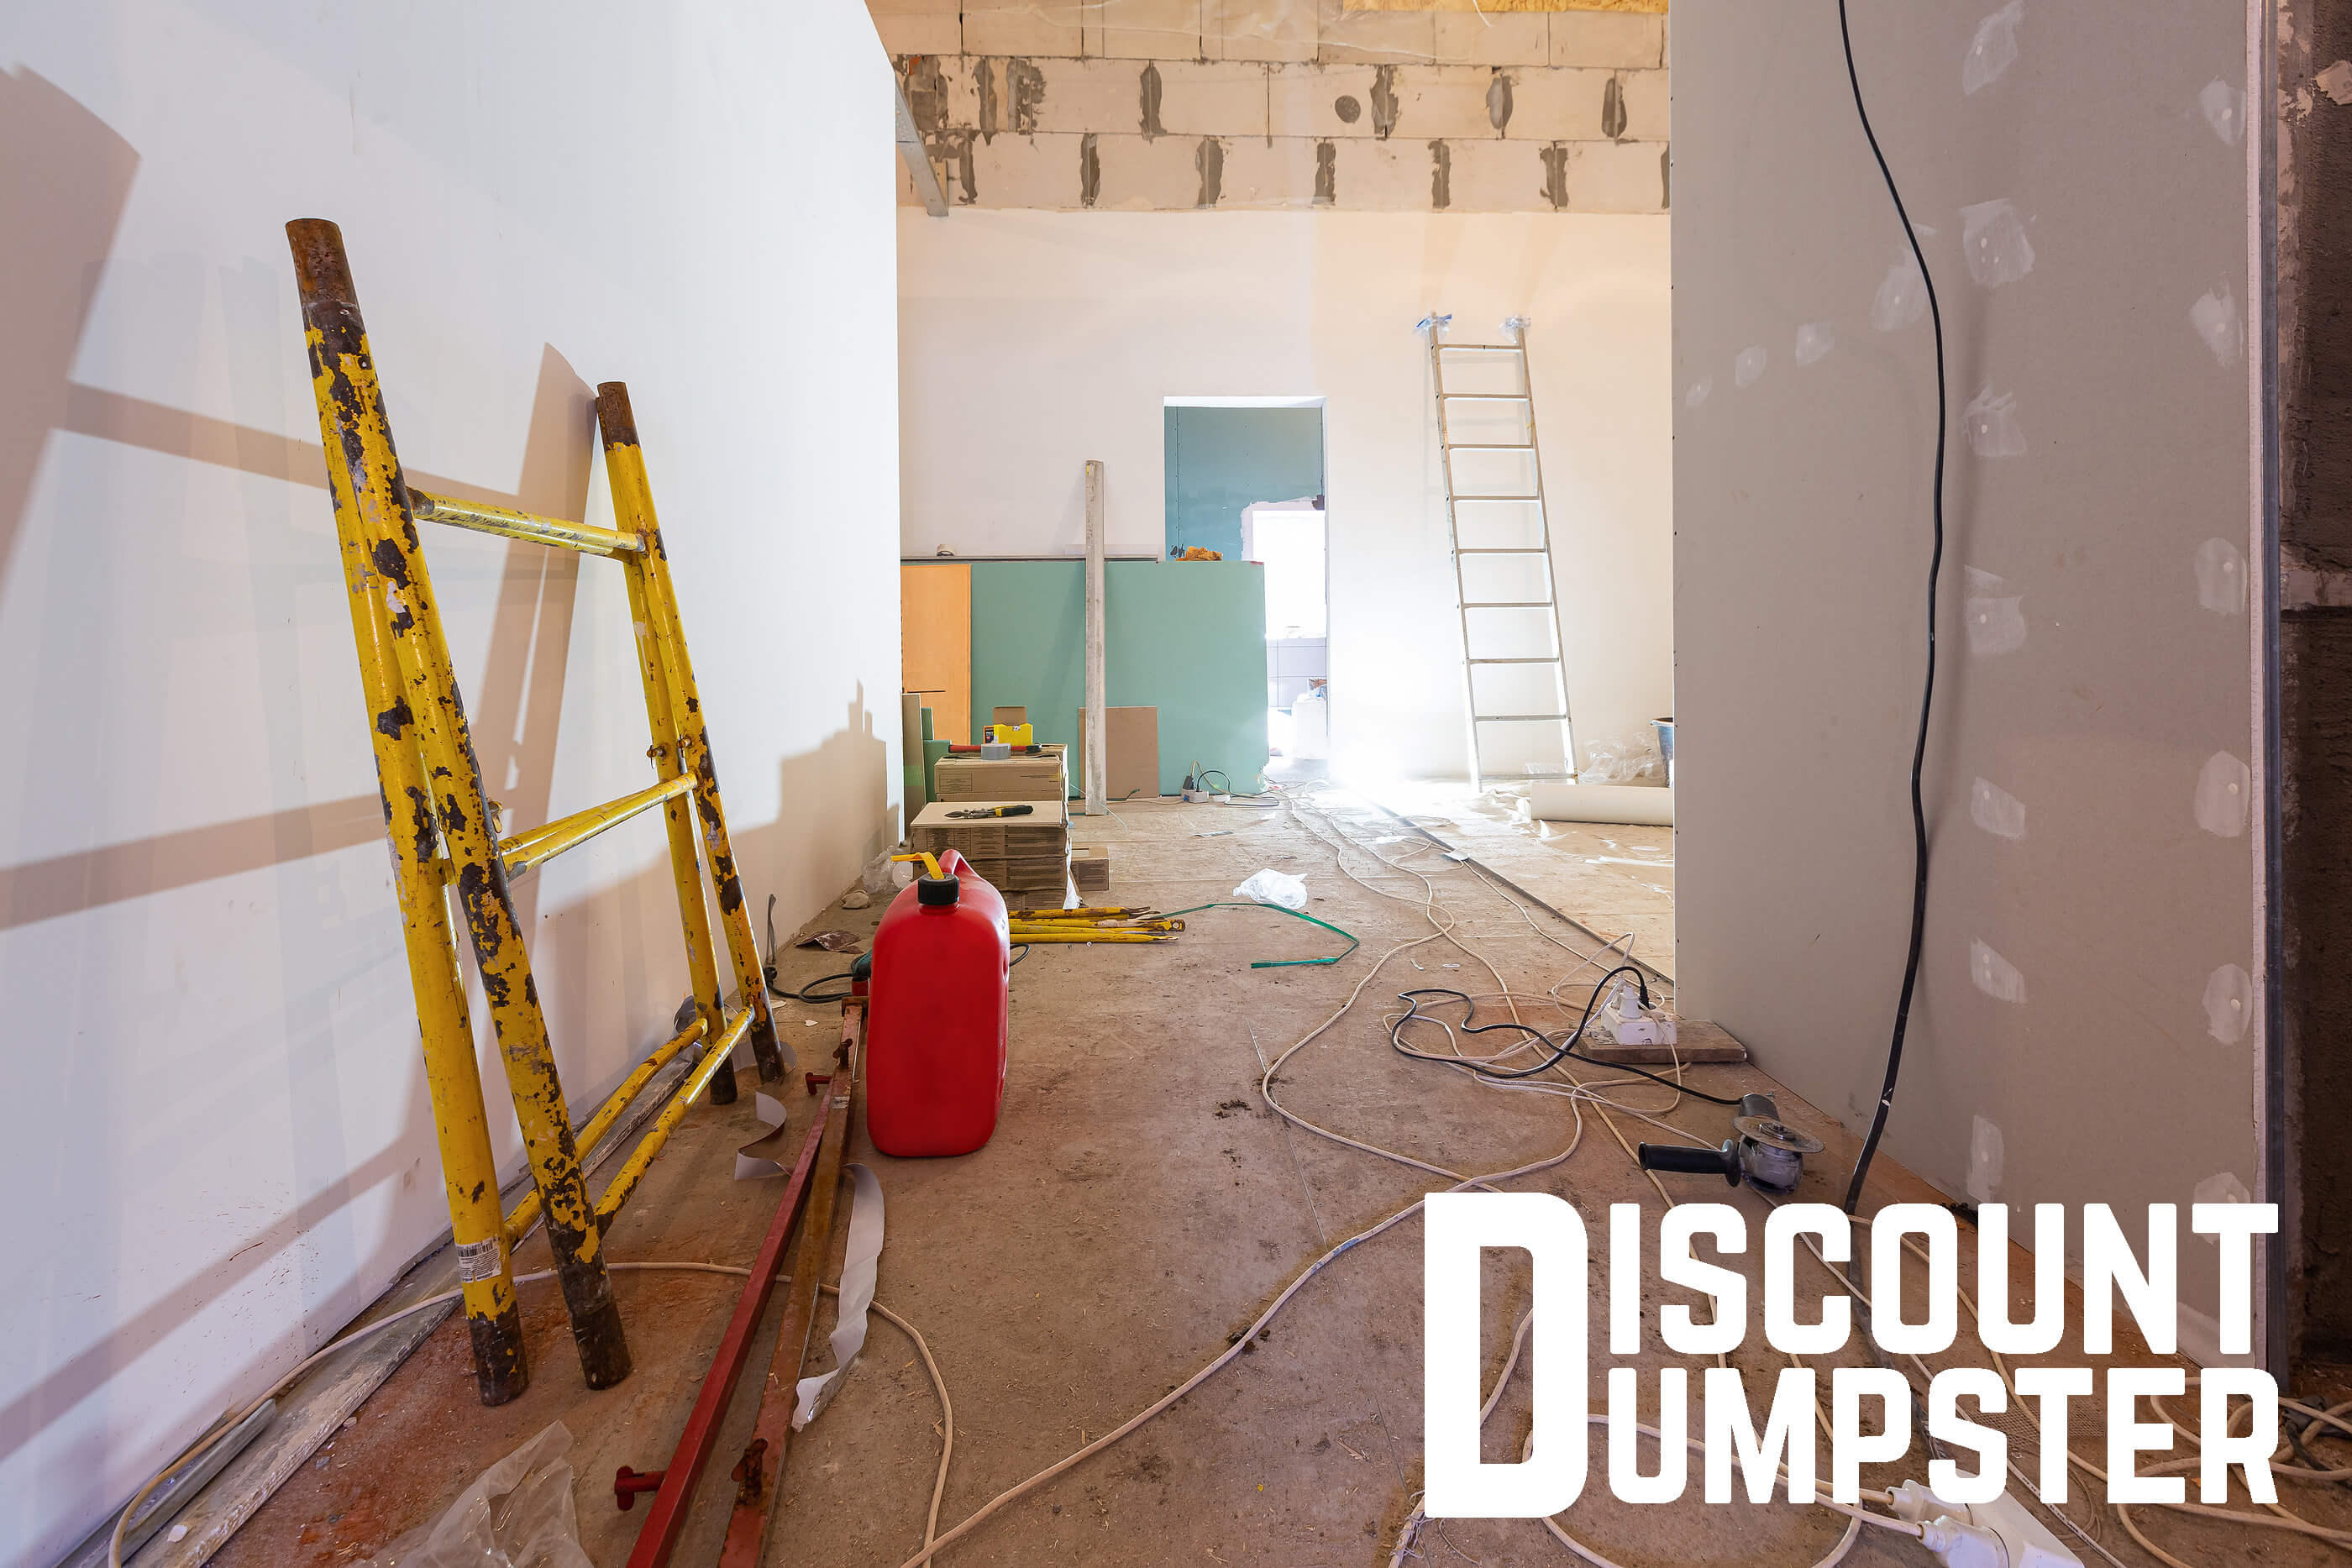 Discount dumpster in Chicago il can help you clear out the waste at your home renovation project